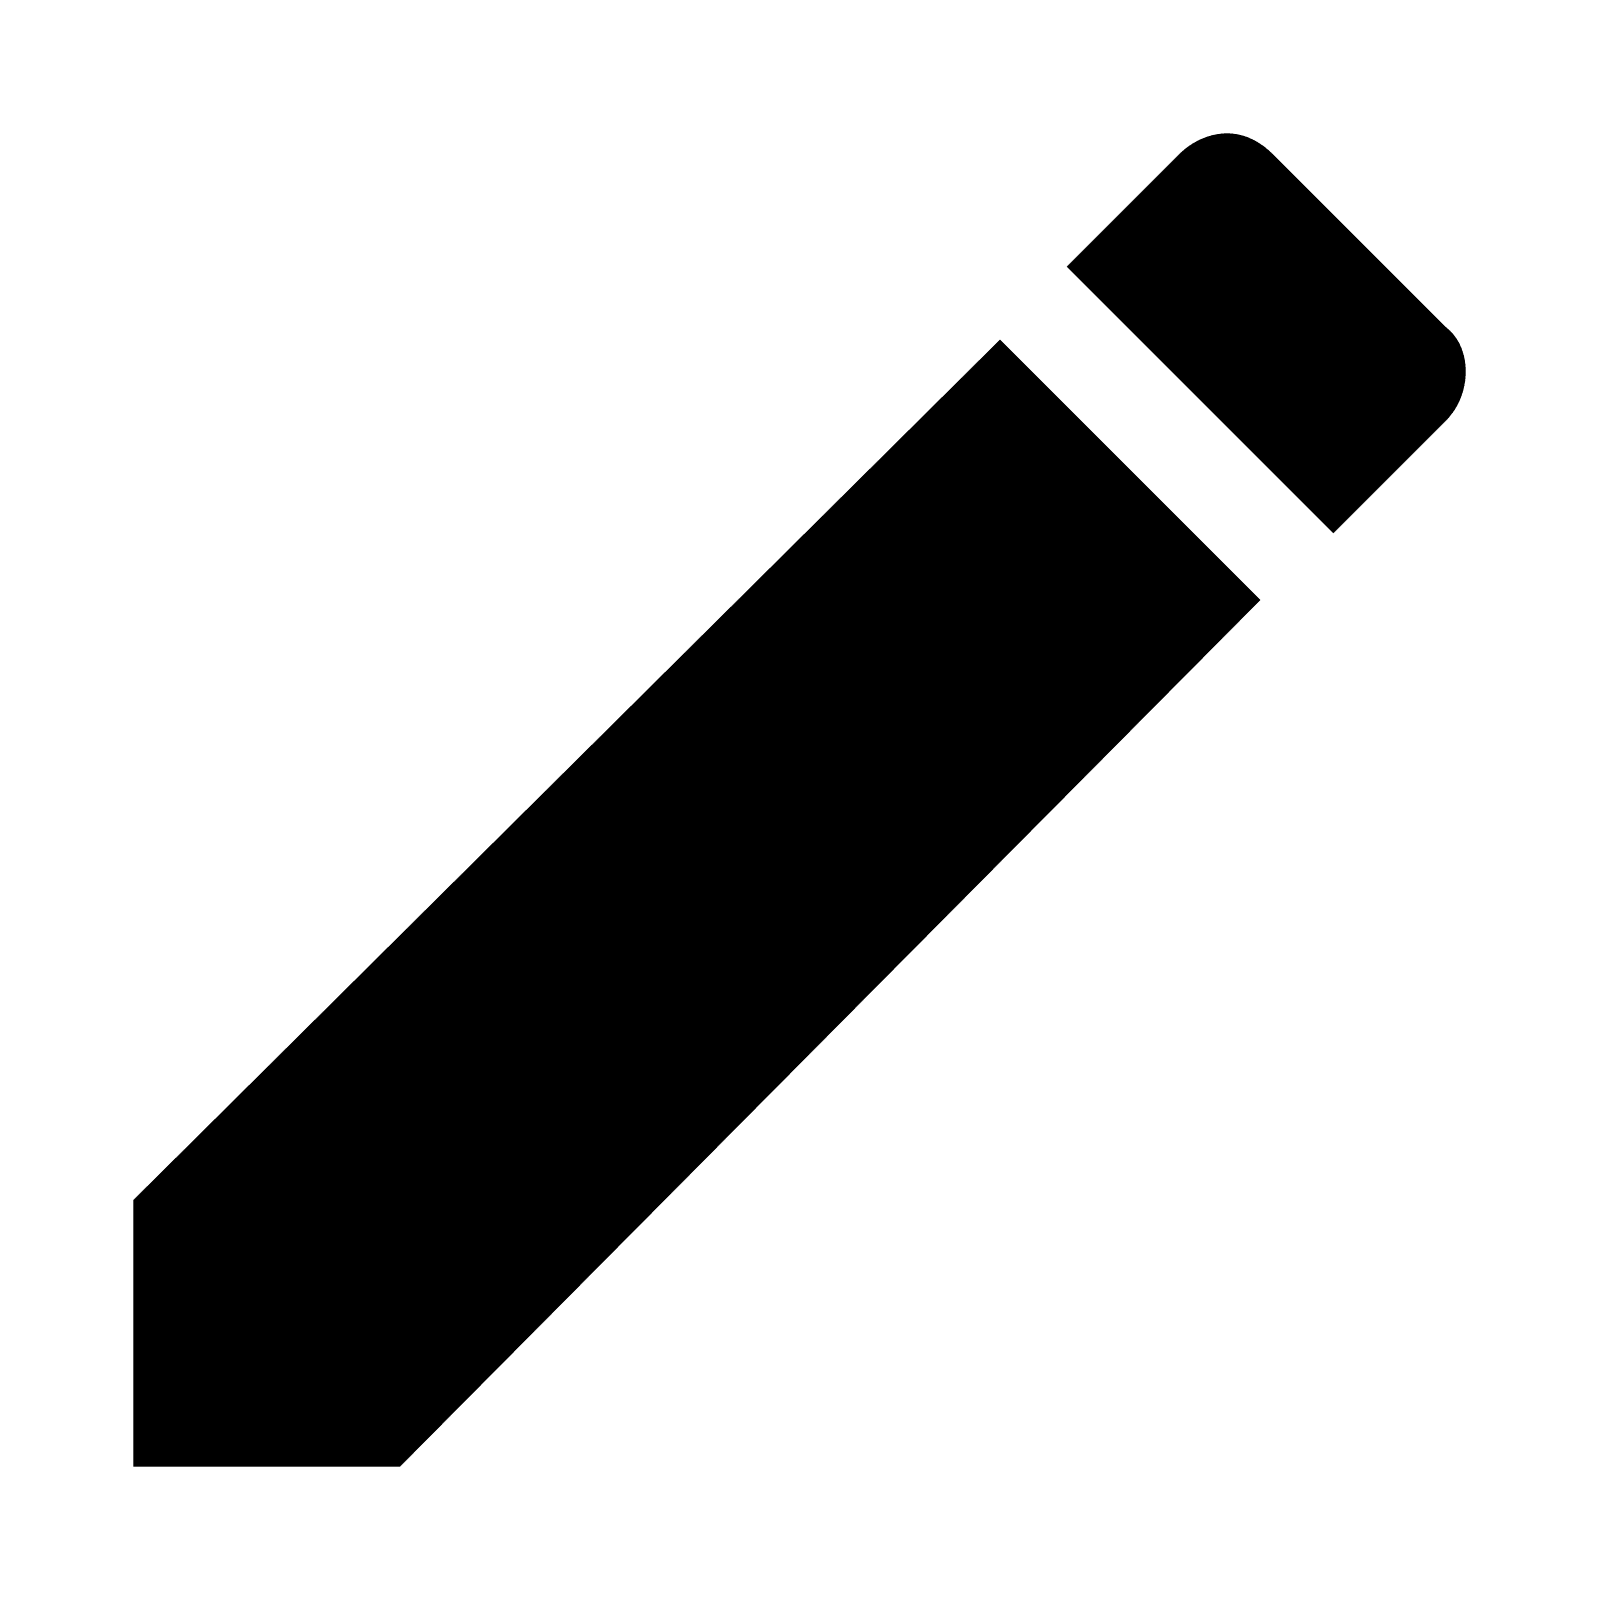 The Icon Is A Simplified Depiction Of The Tip Of A Common Pencil, Sharpened To. Png 50 Px - Tip Of Pencil, Transparent background PNG HD thumbnail